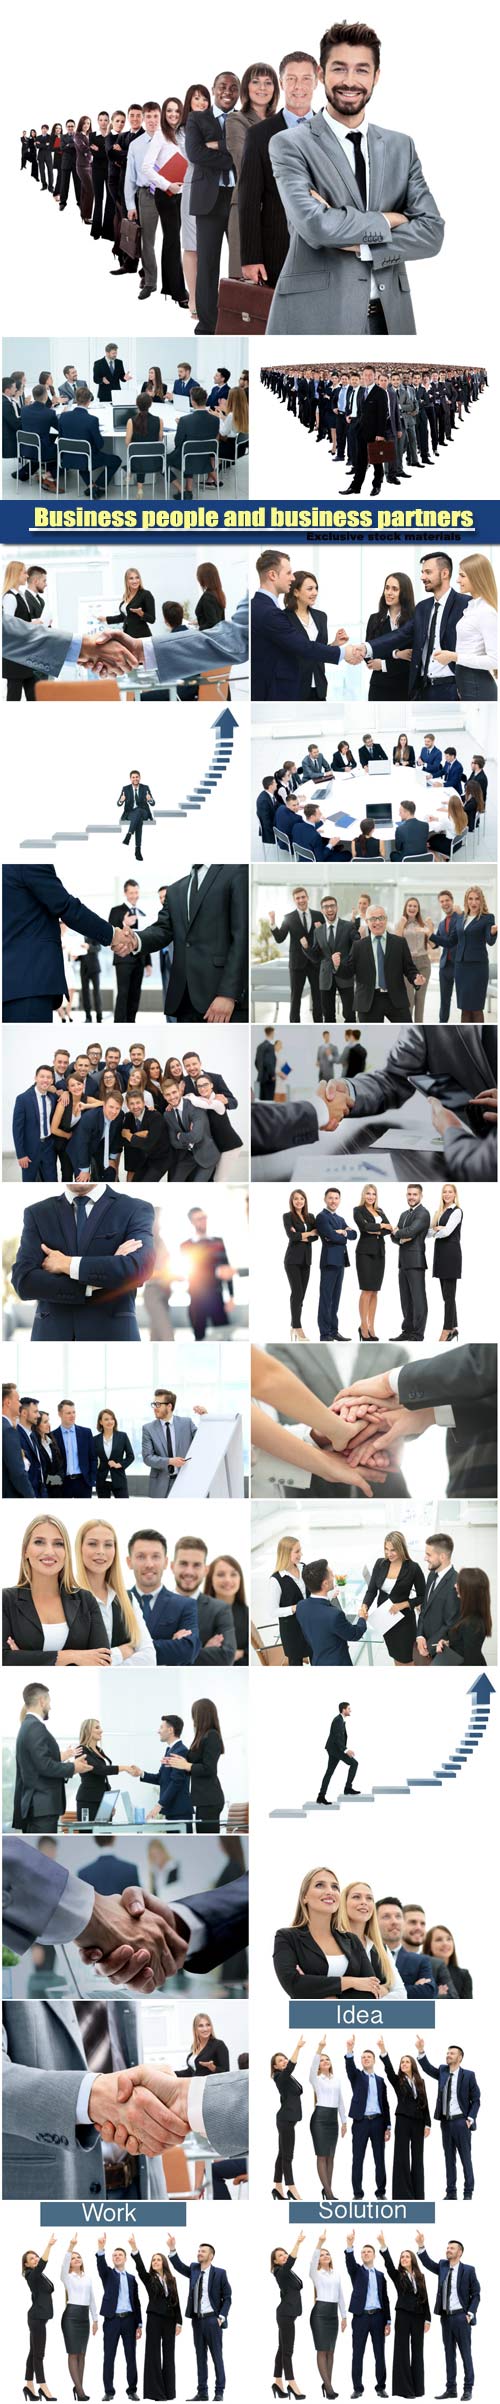 Business people and business partners greeting each other with handshake, c ...